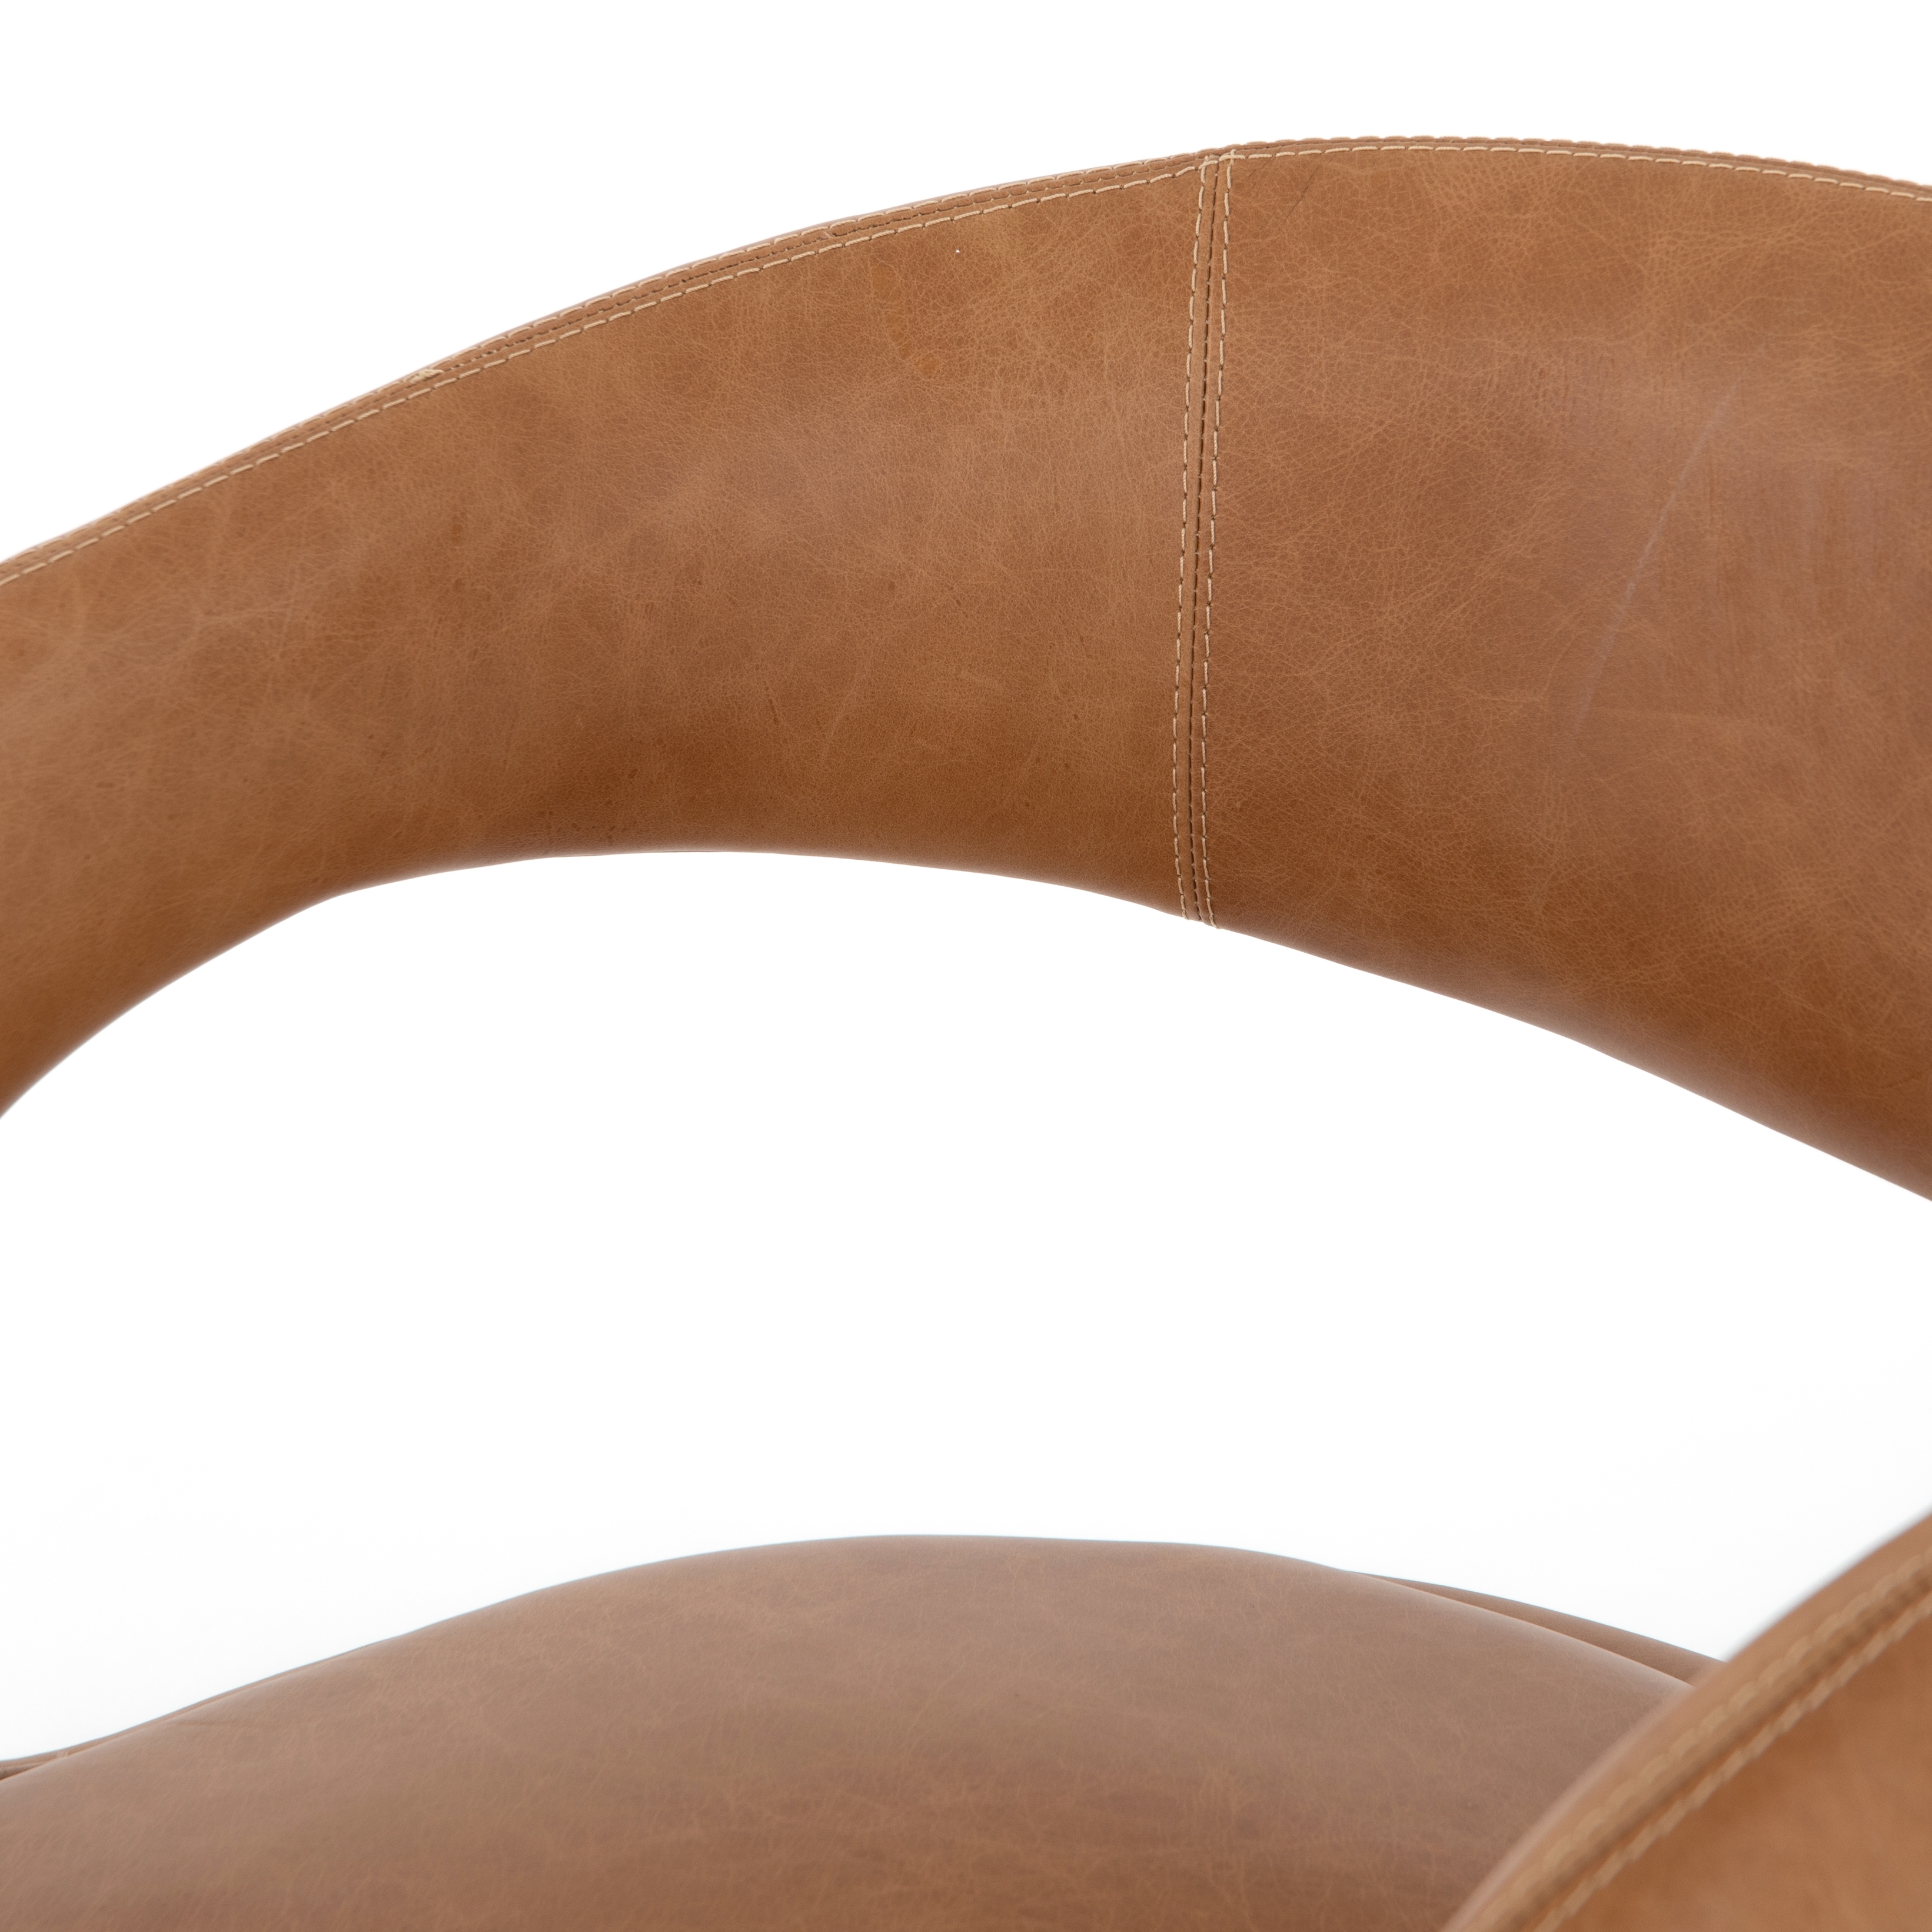 Hawkins Dining Chair-Butterscotch - Image 9